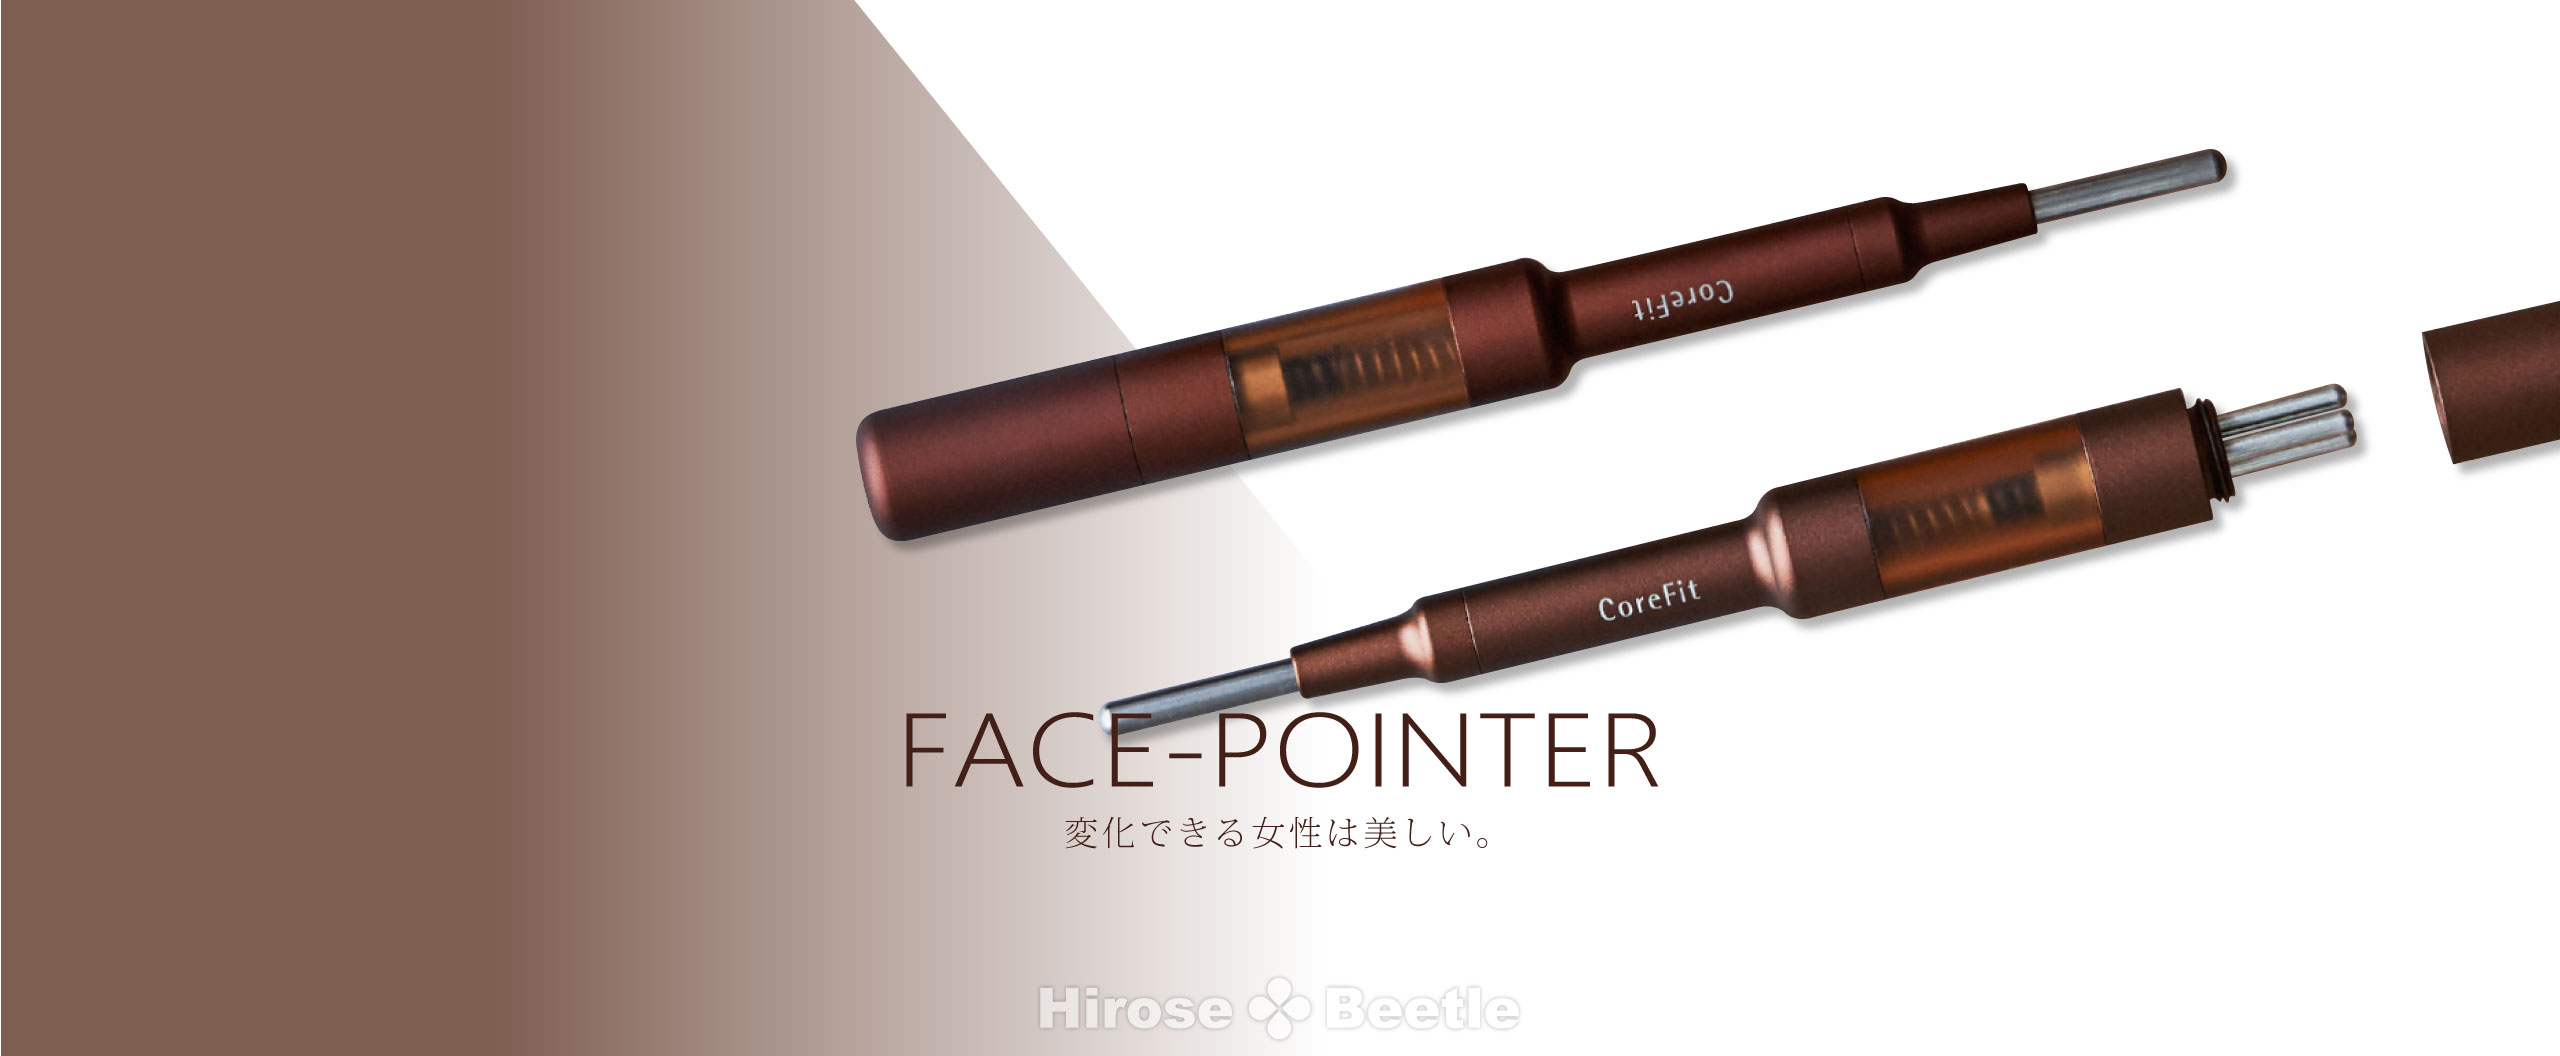 CORE FIT Face-Pointer-